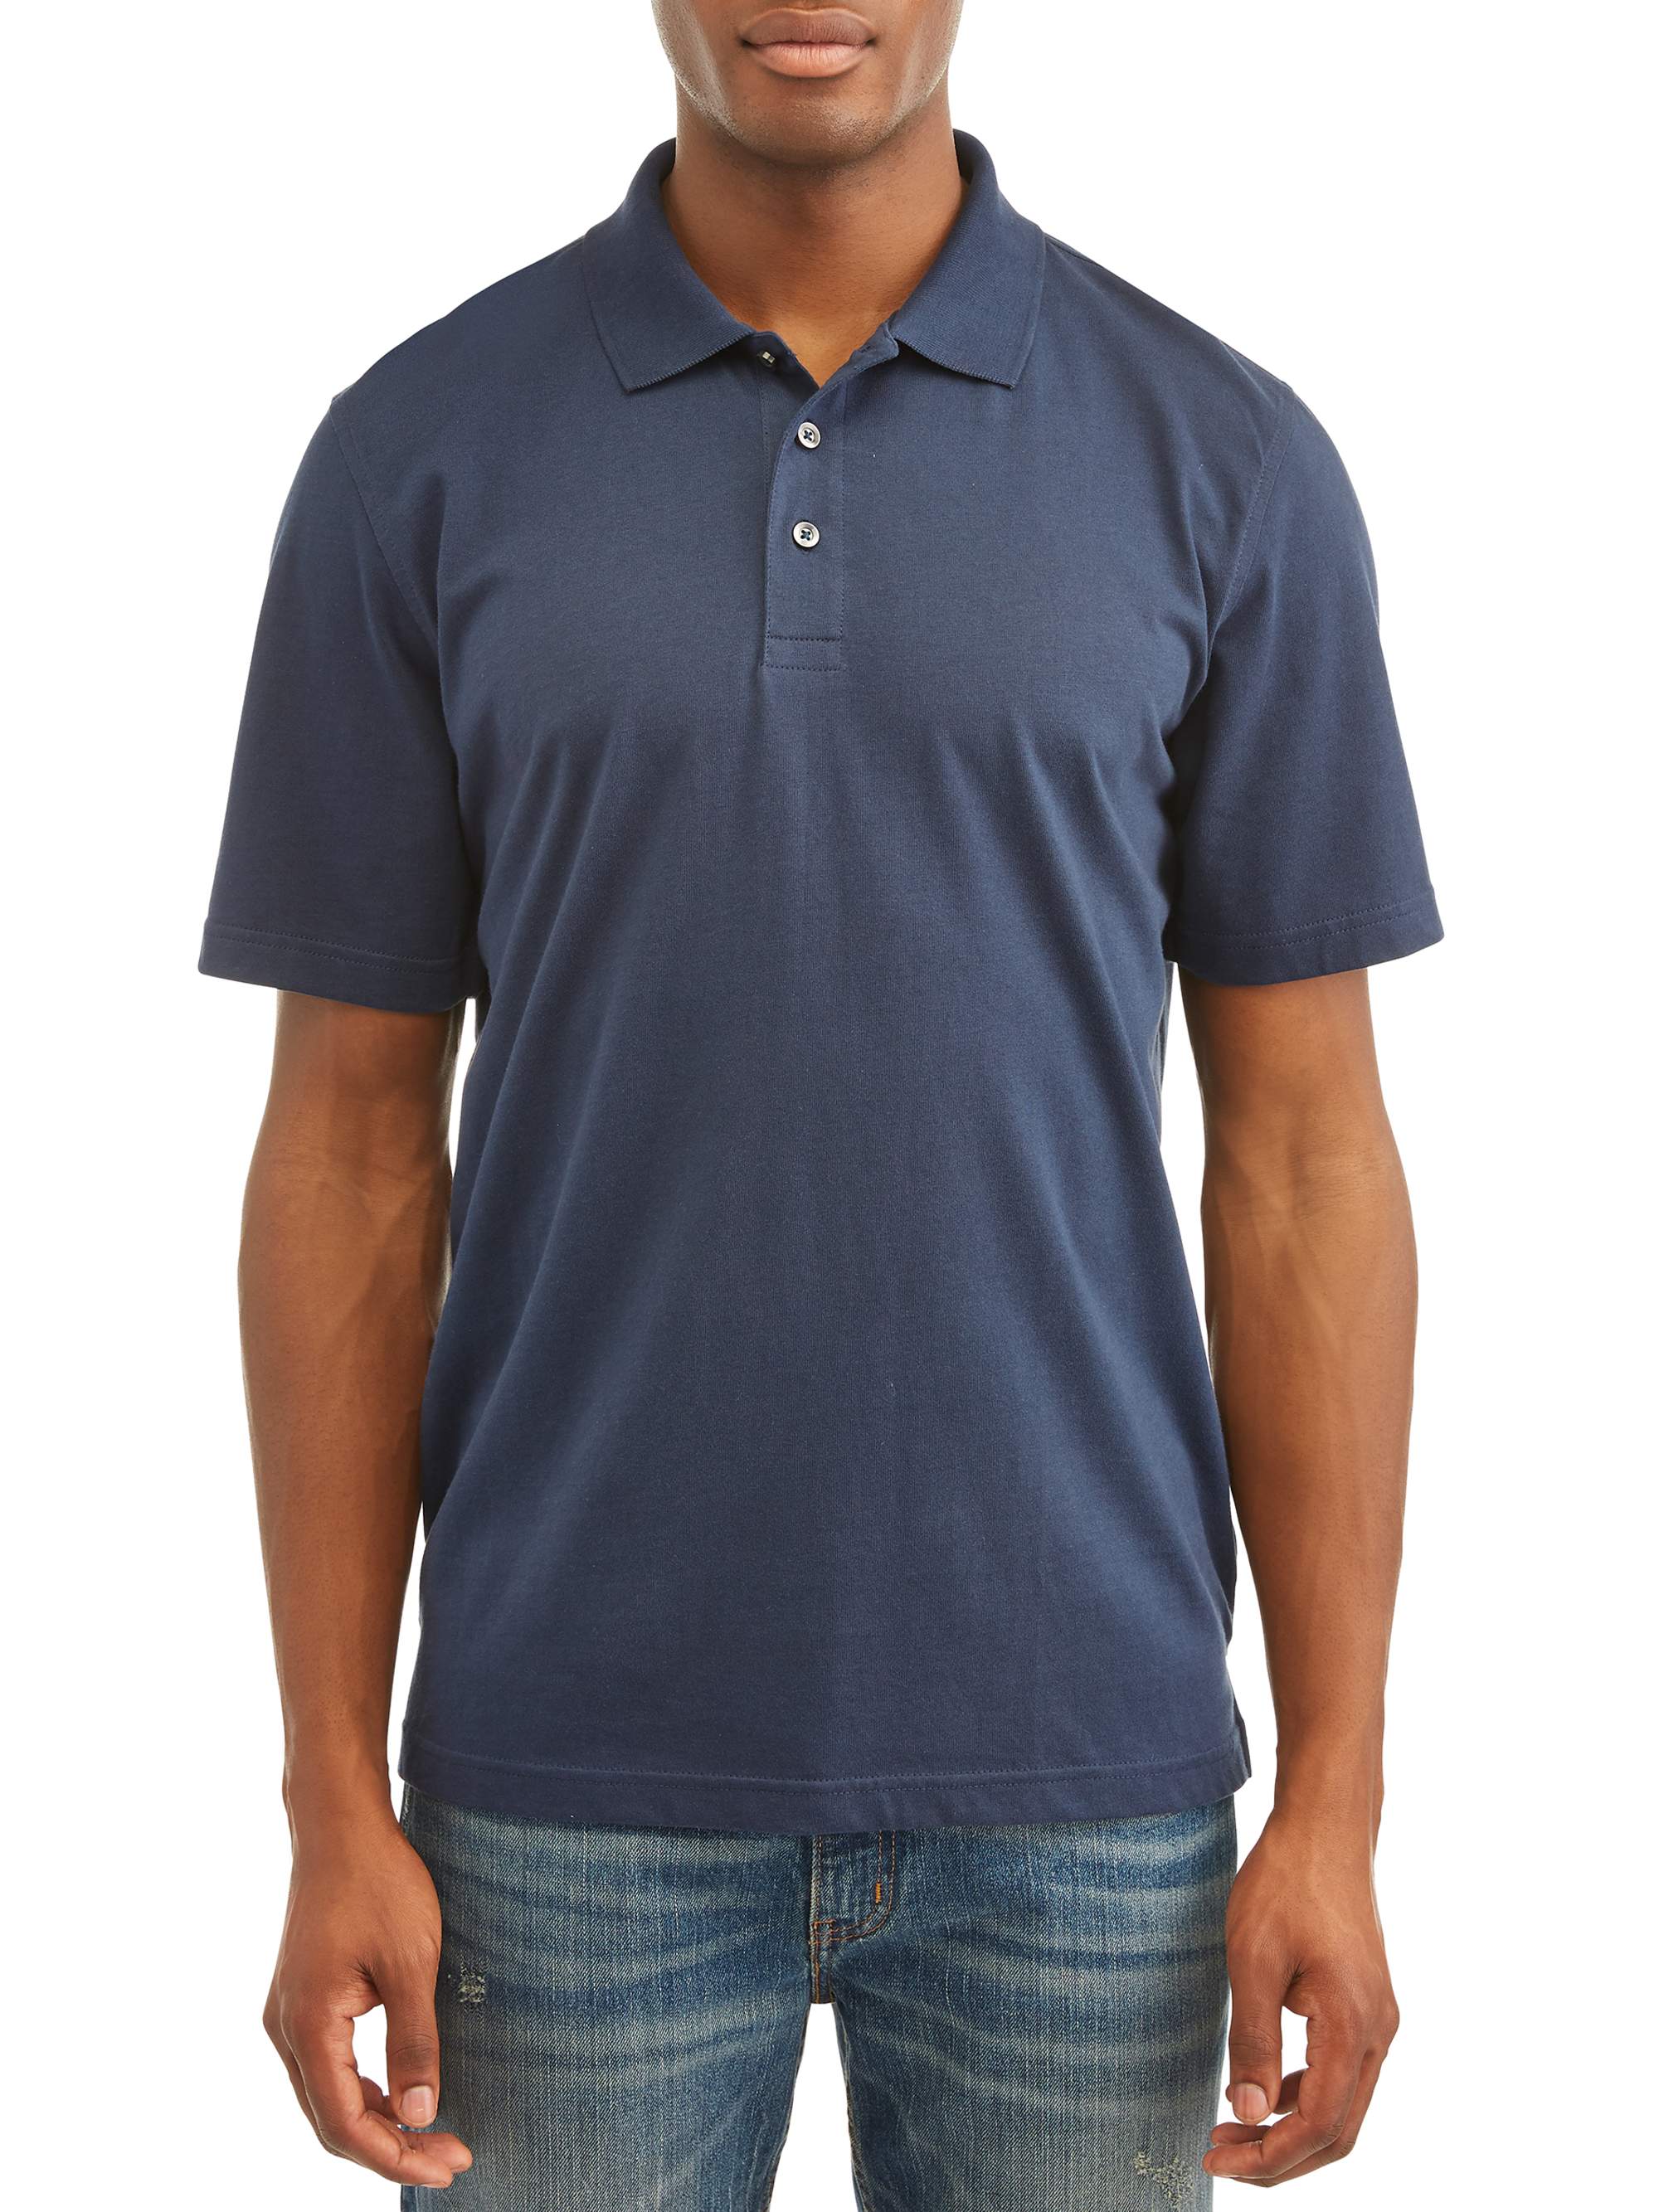 George Men's Short Sleeve Solid Polo Shirt - image 1 of 4